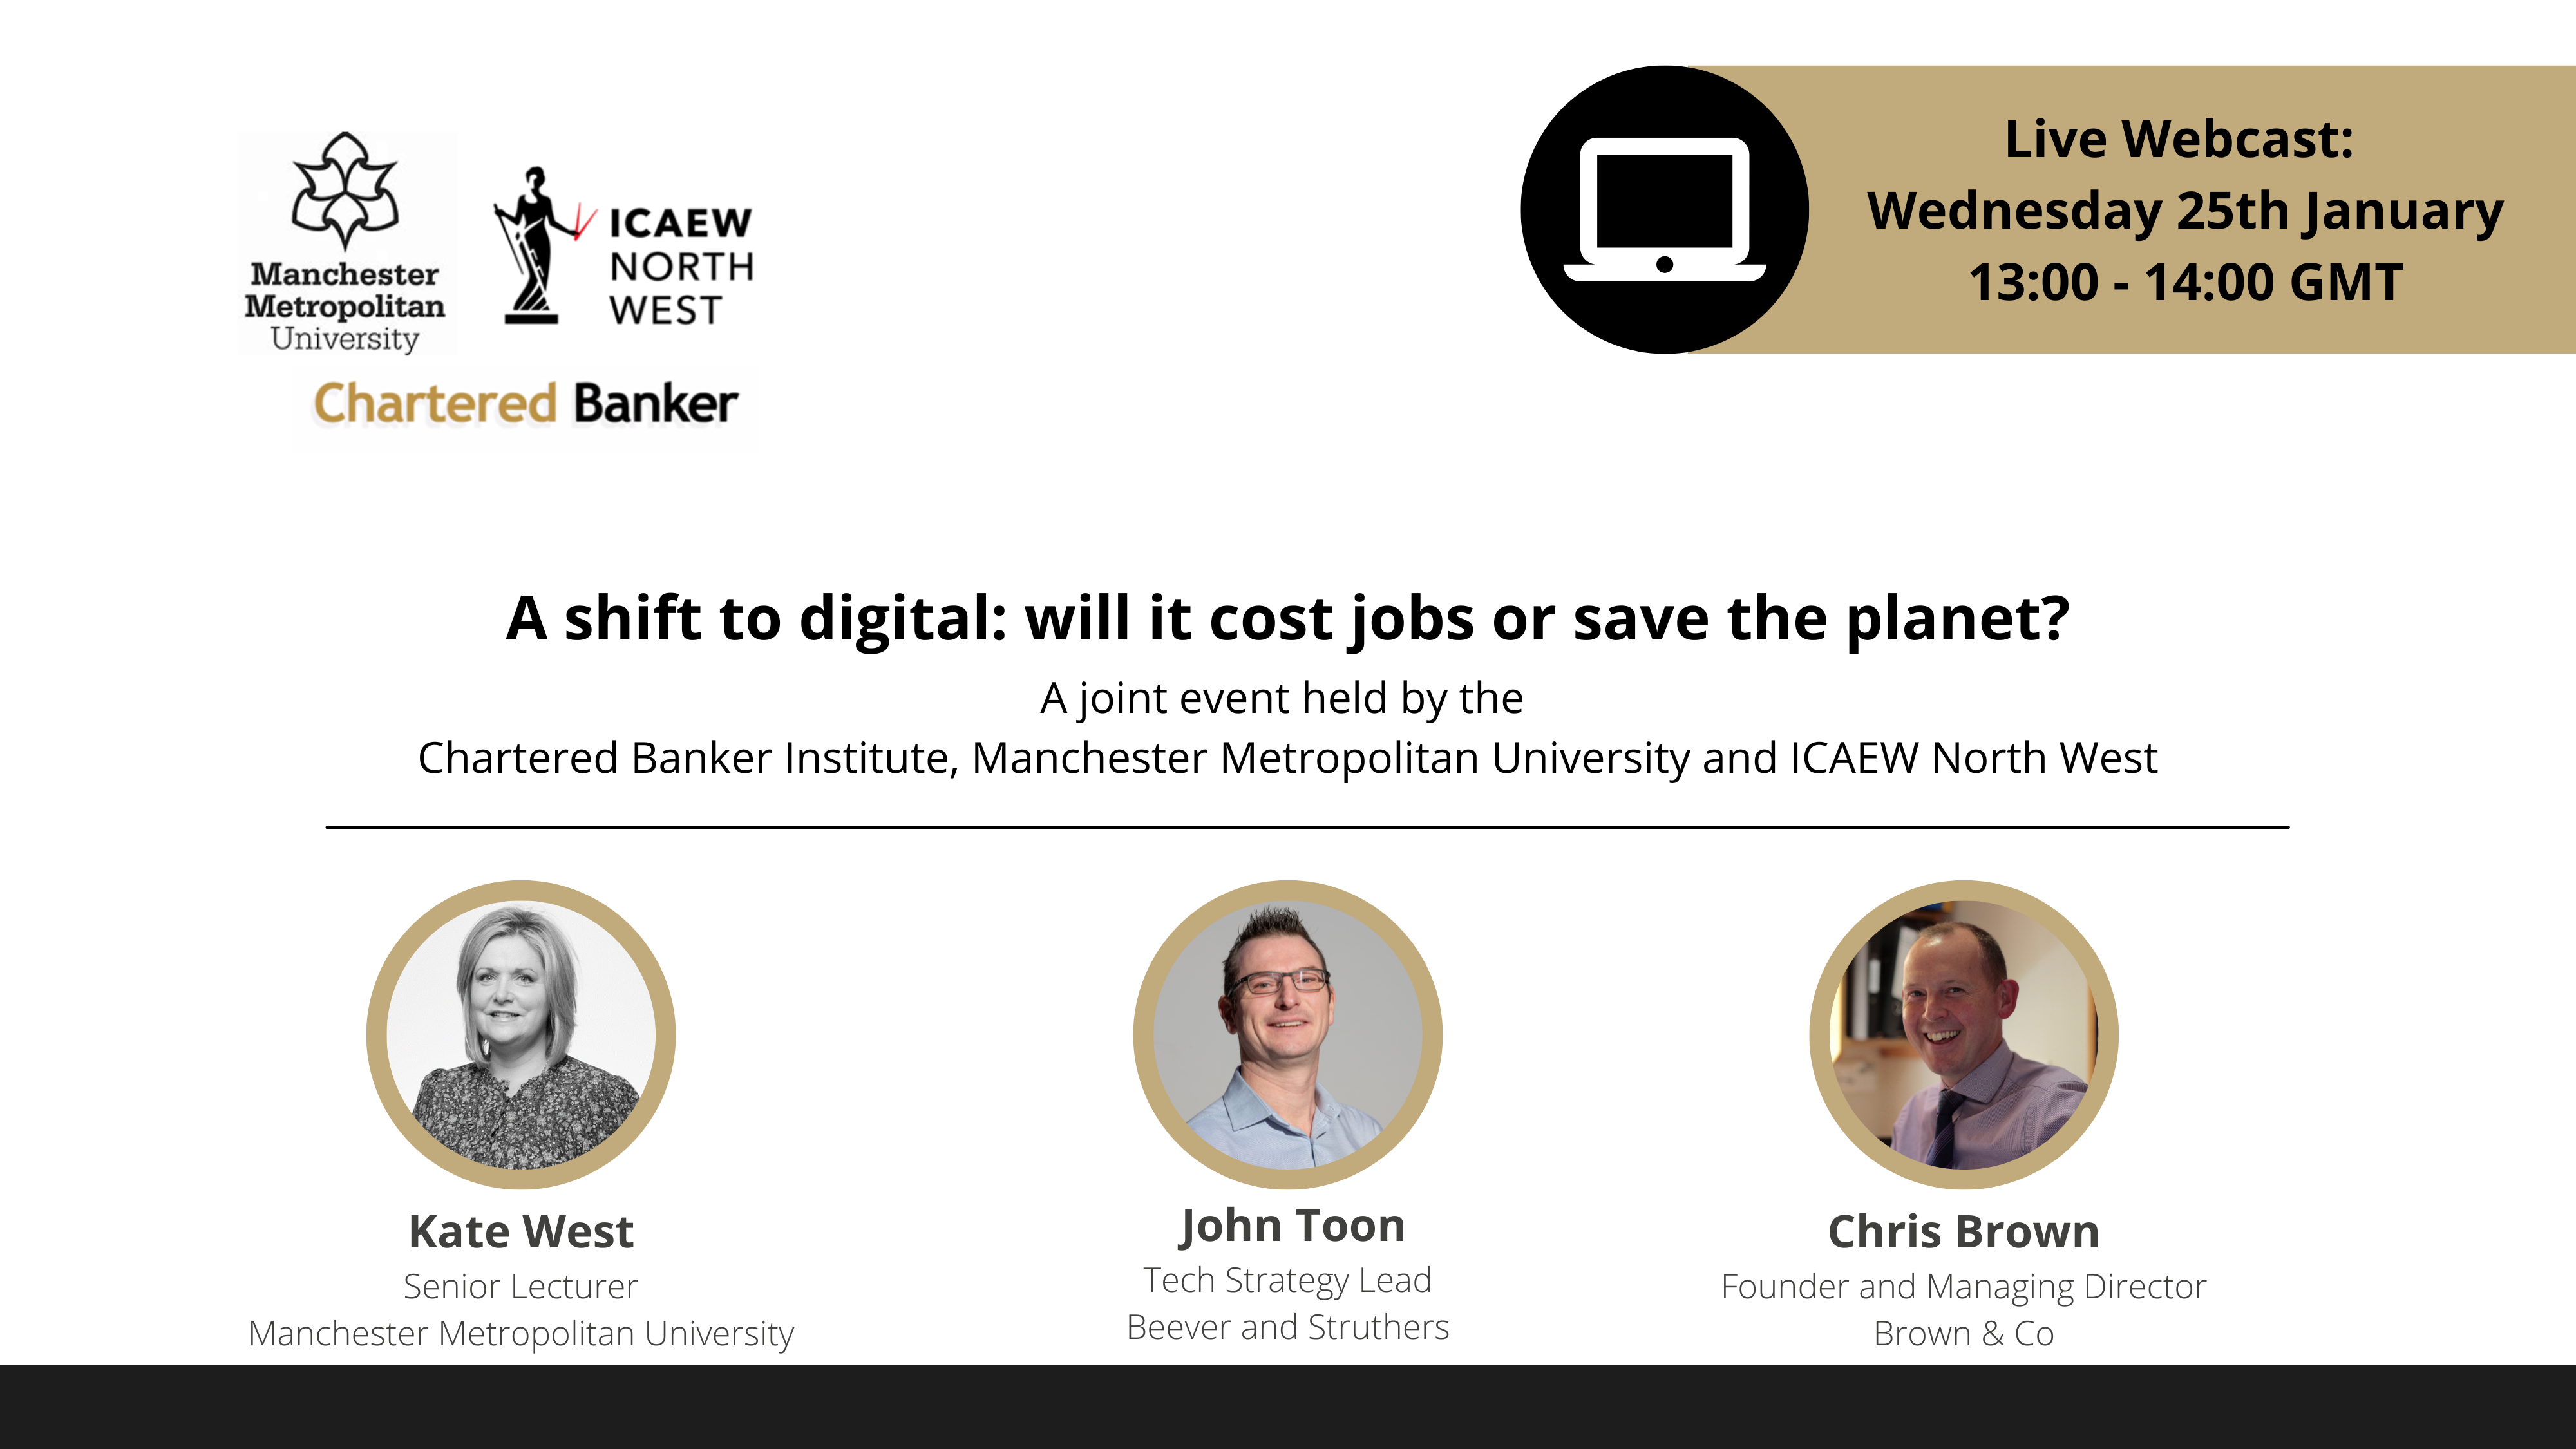 A shift to digital: will it cost jobs or save the planet?